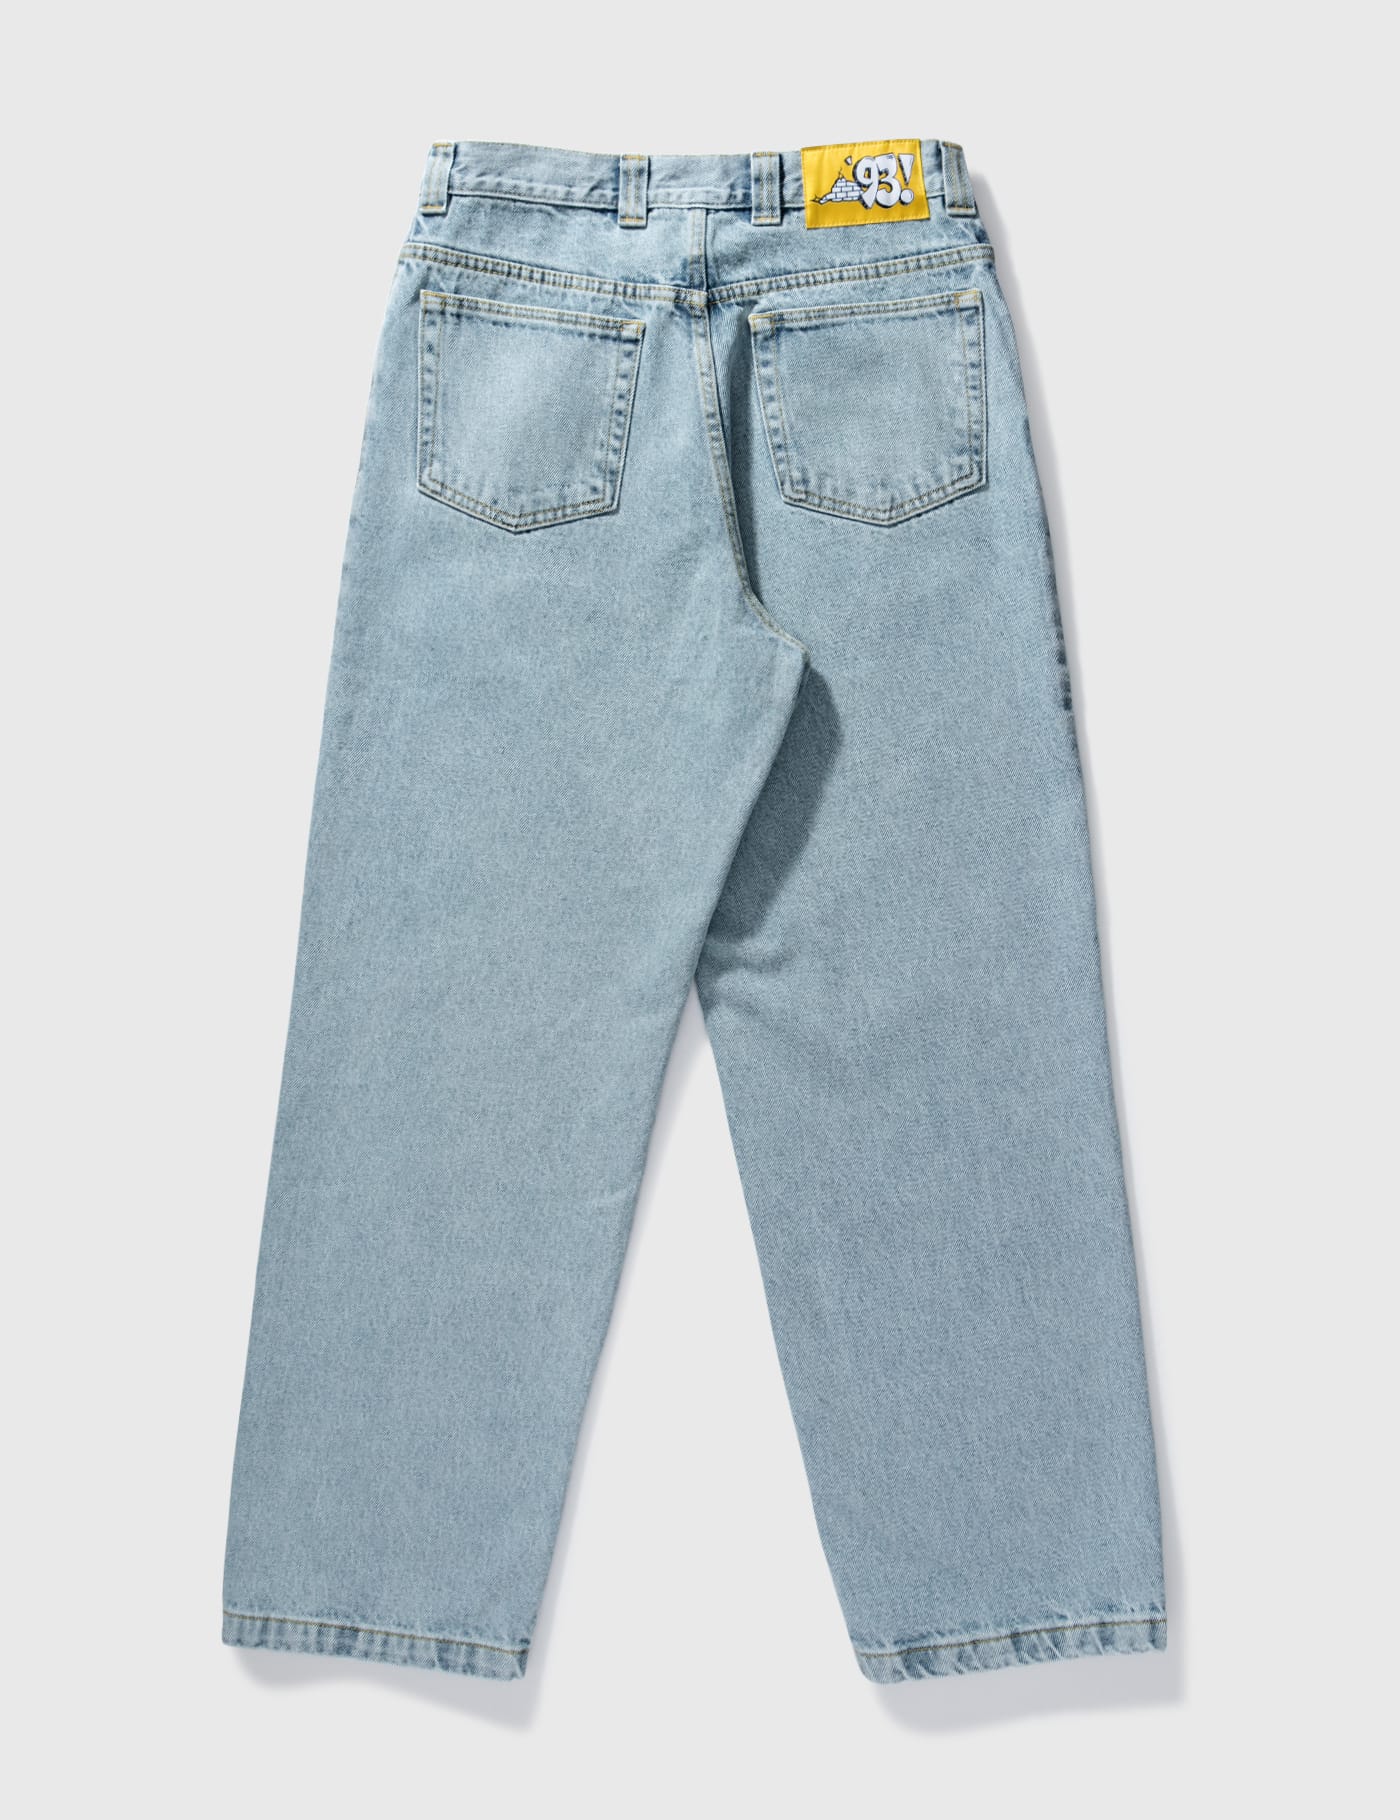 Polar Skate Co. - 93 Denim Jeans | HBX - Globally Curated Fashion and  Lifestyle by Hypebeast